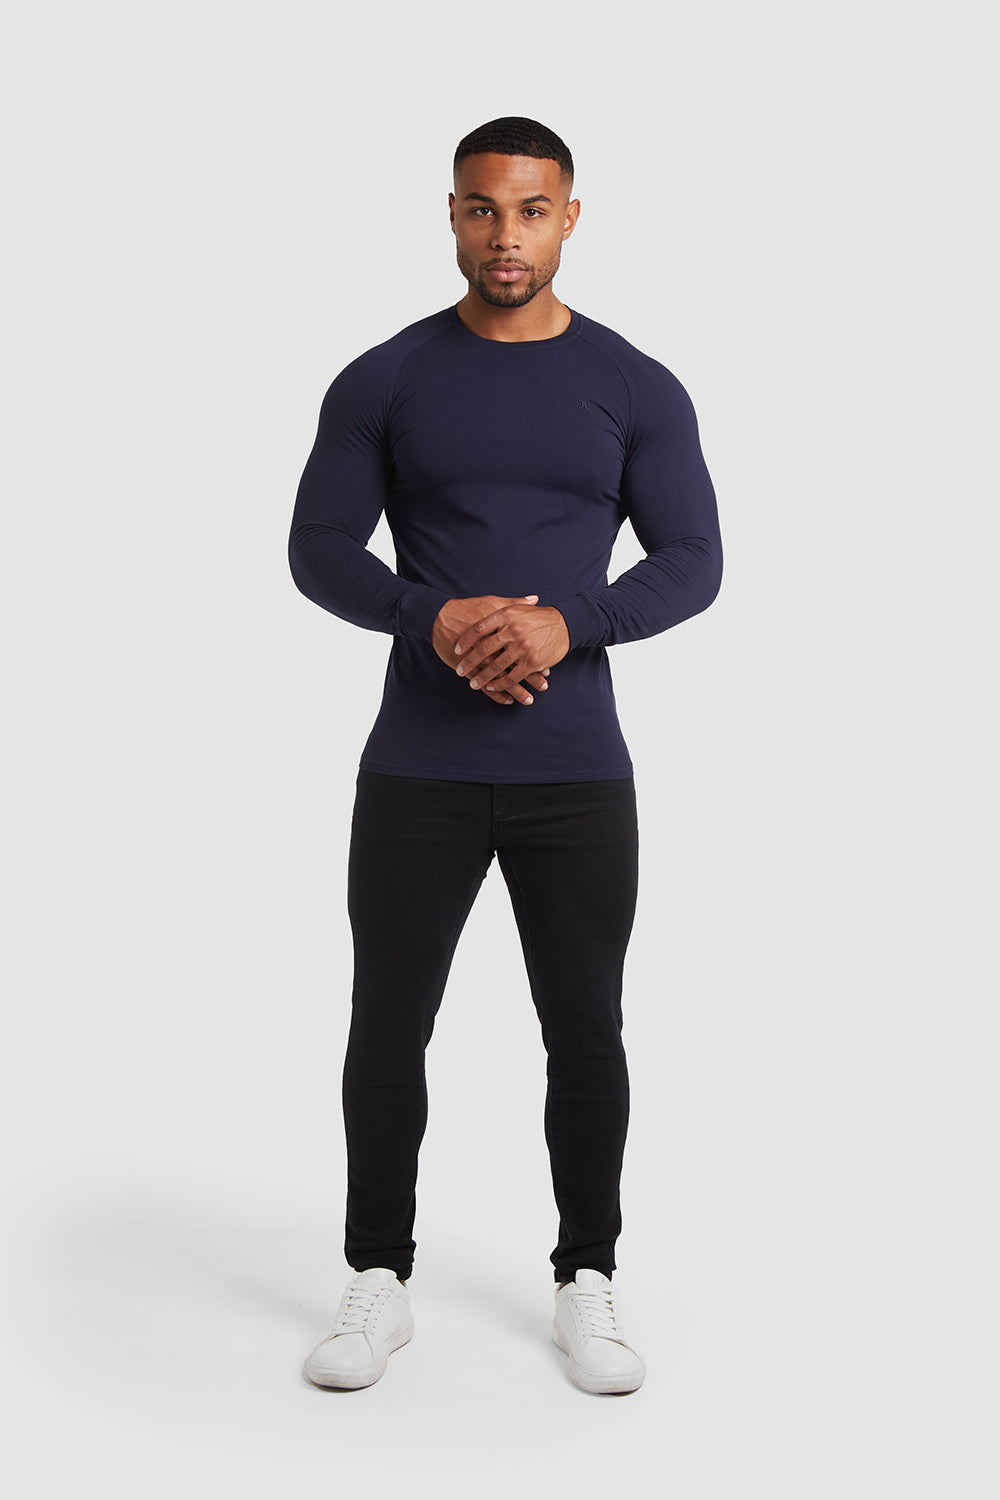 Muscle Fit T-Shirt in Navy - TAILORED ATHLETE - ROW